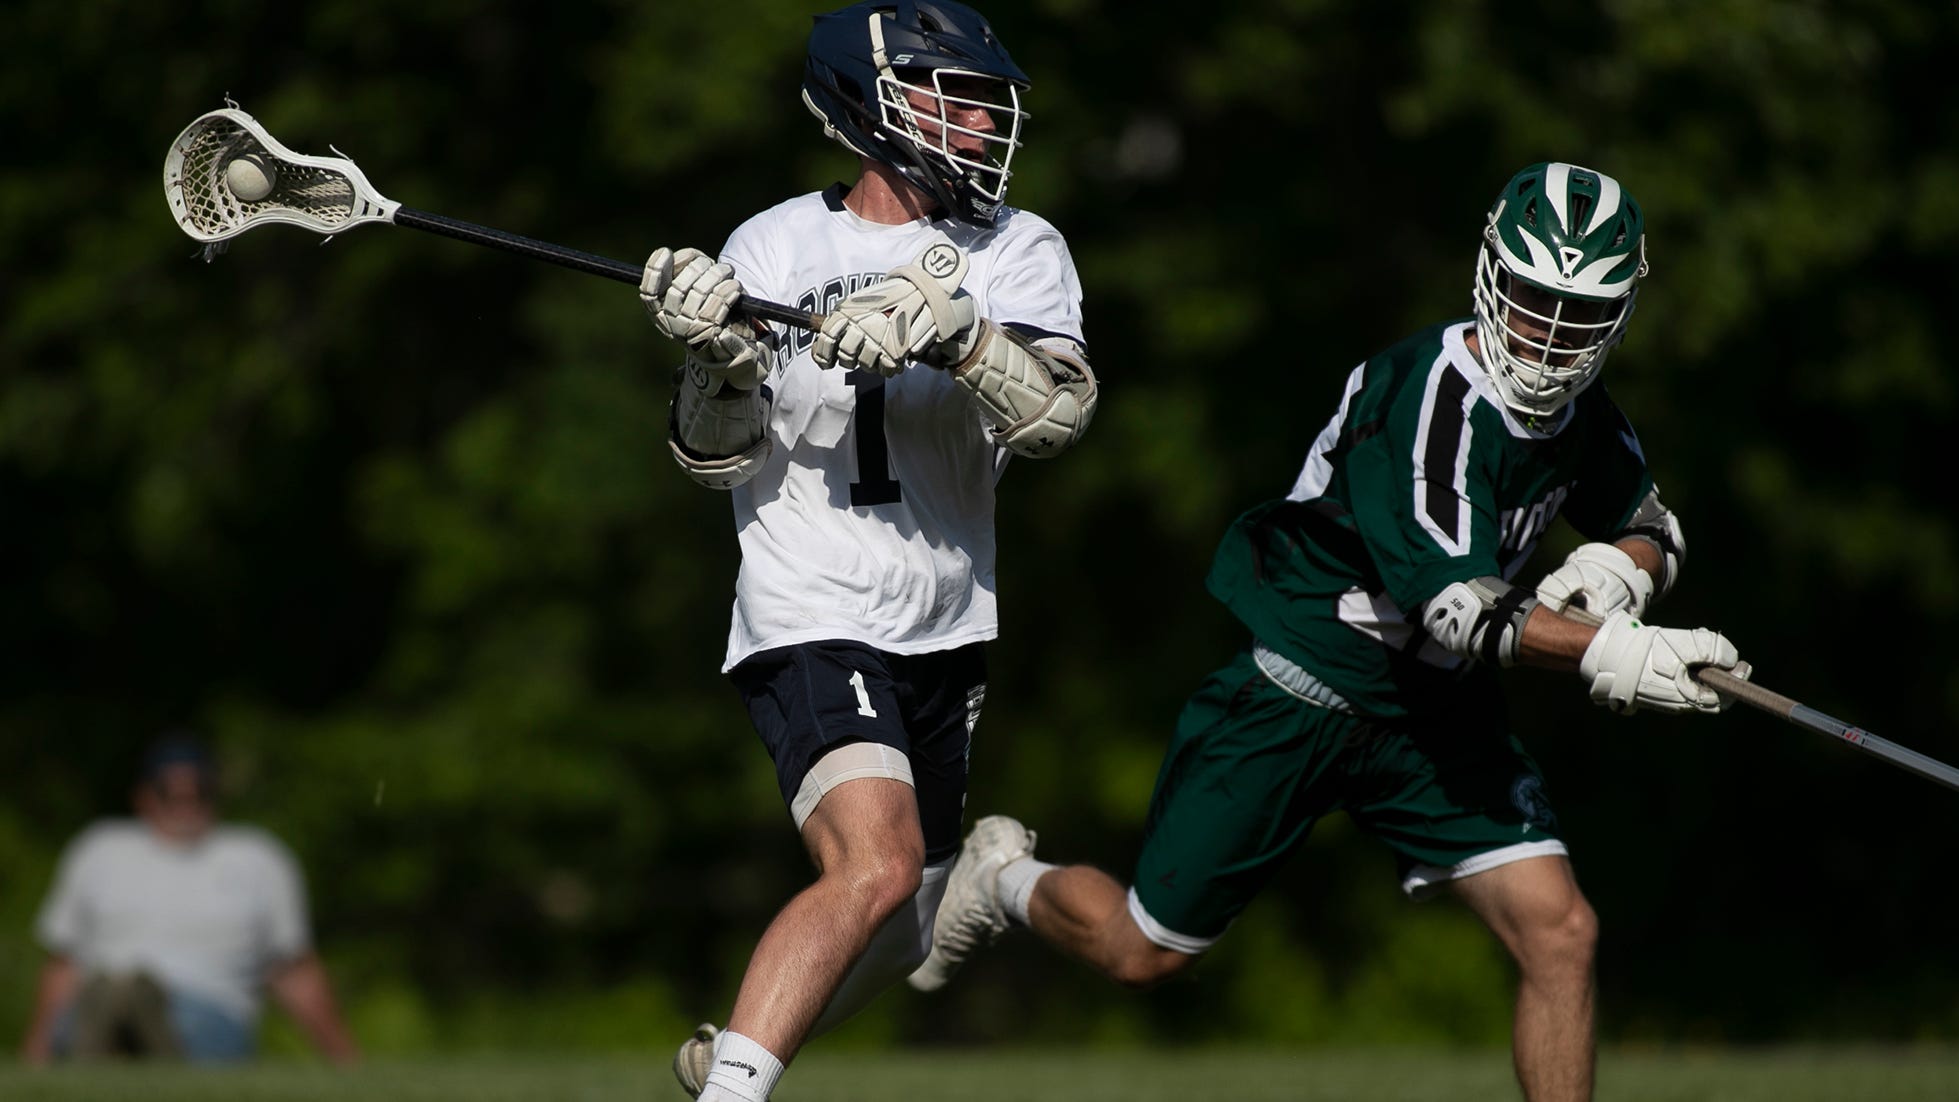 HIGH SCHOOL ROUNDUP: Rockland's Lucas Leander opens lax season with jaw-dropping stat line